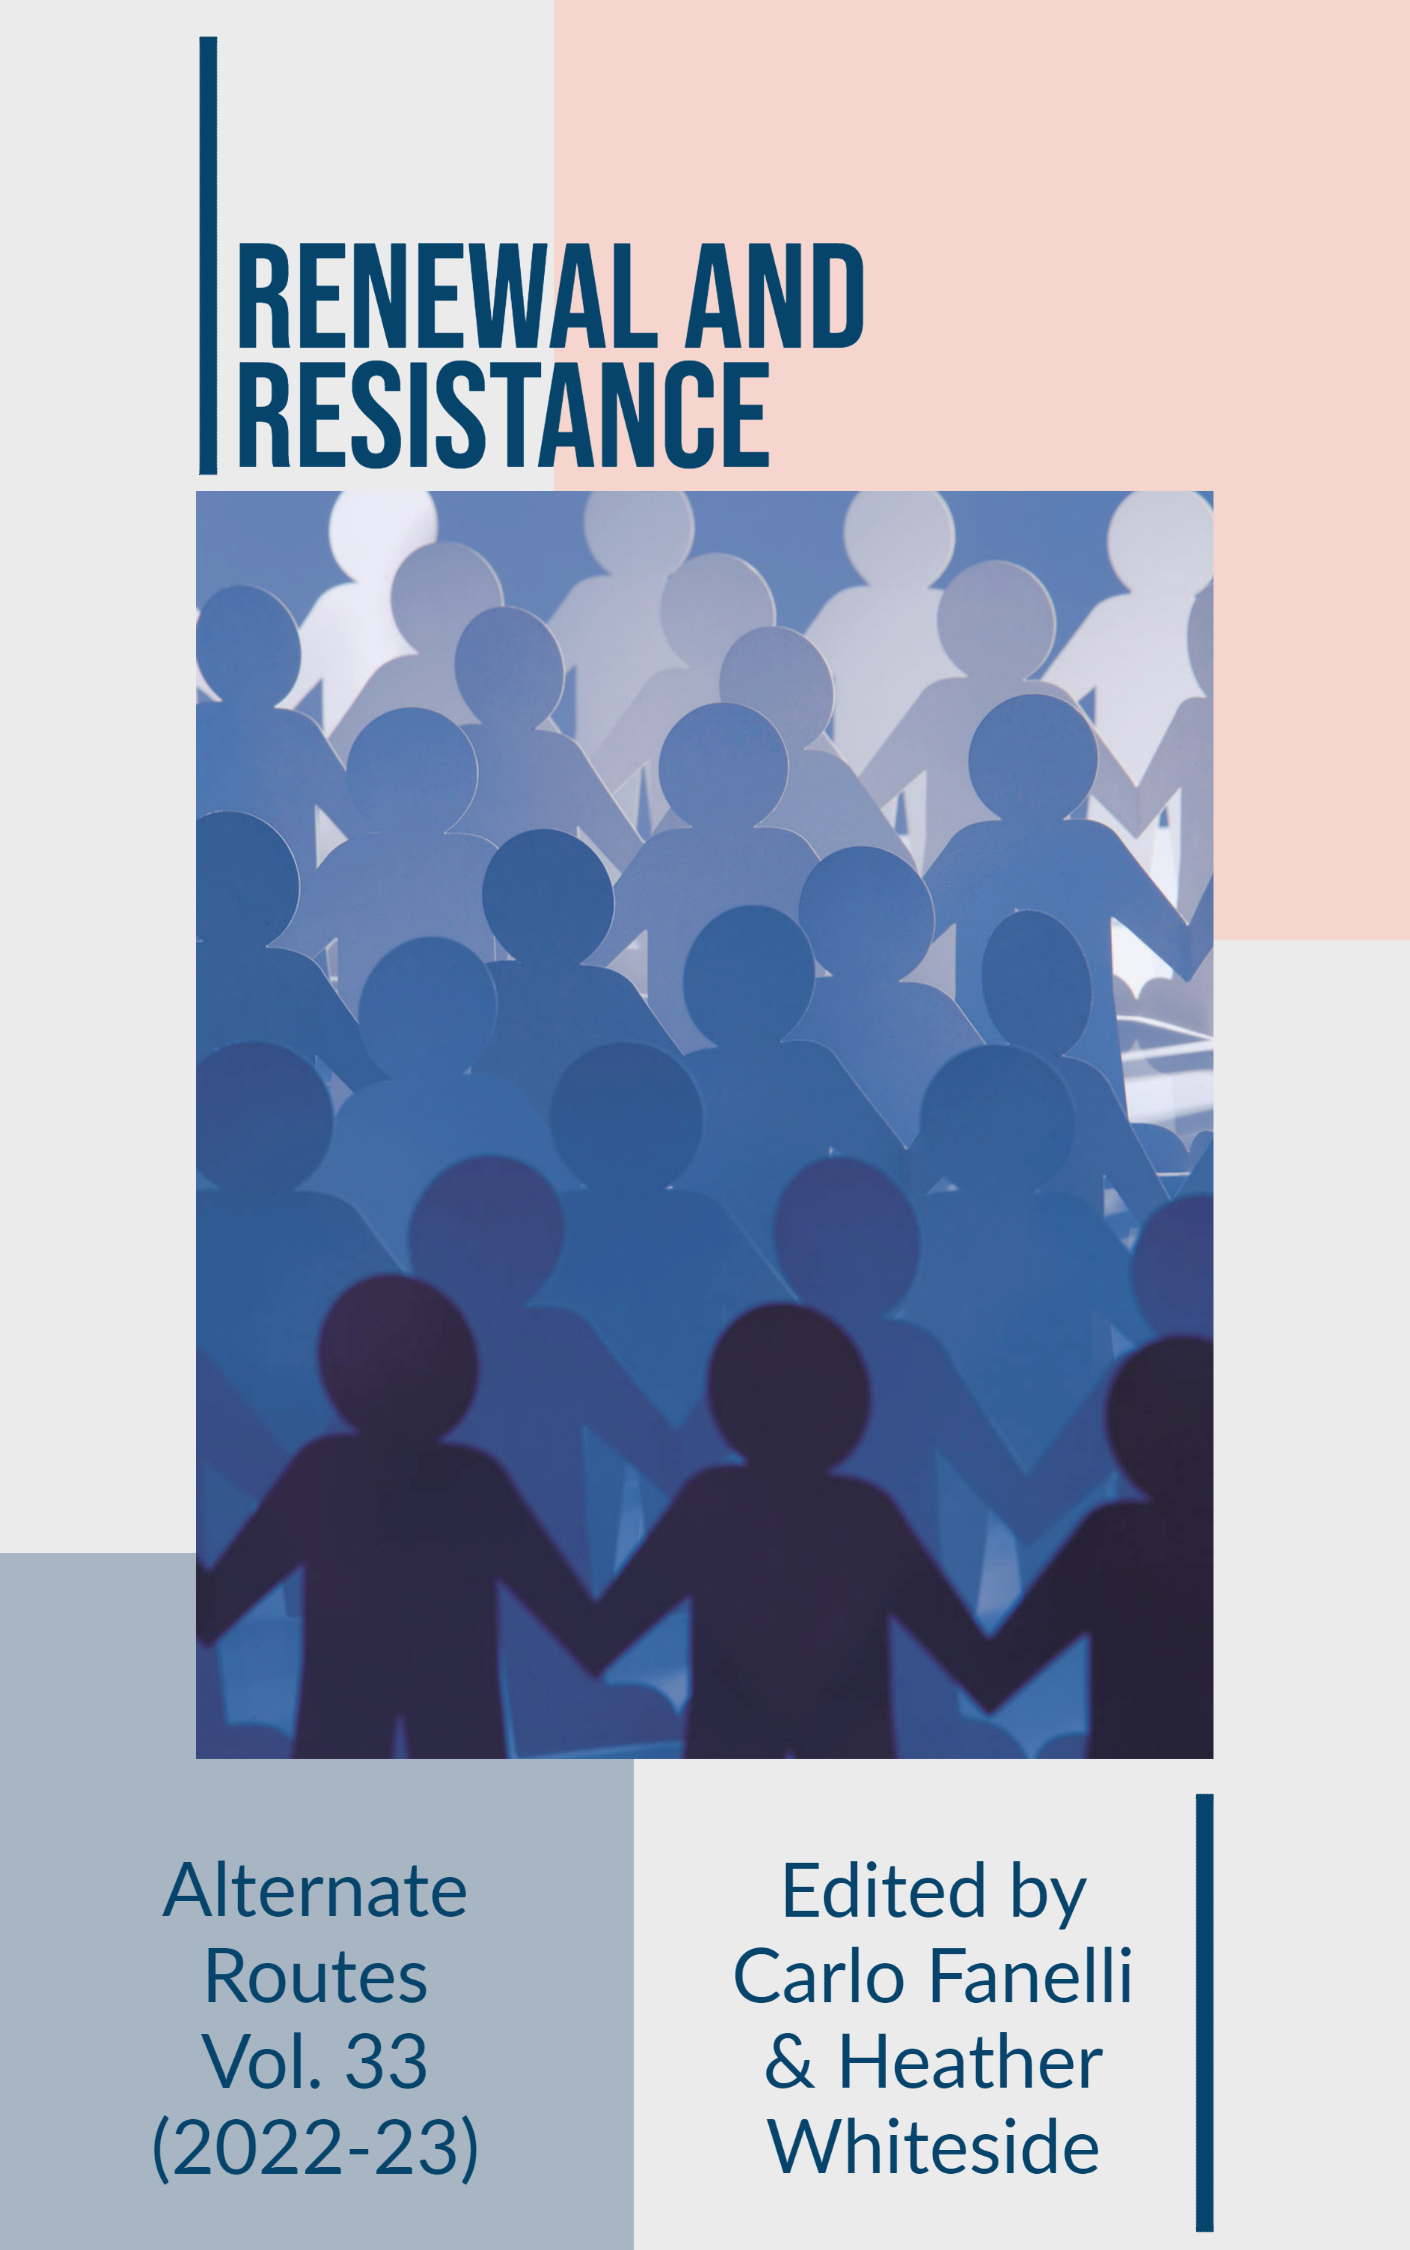 Cover: Alternate Routes, colume 33, 20220-2023: Renewal and Resistance